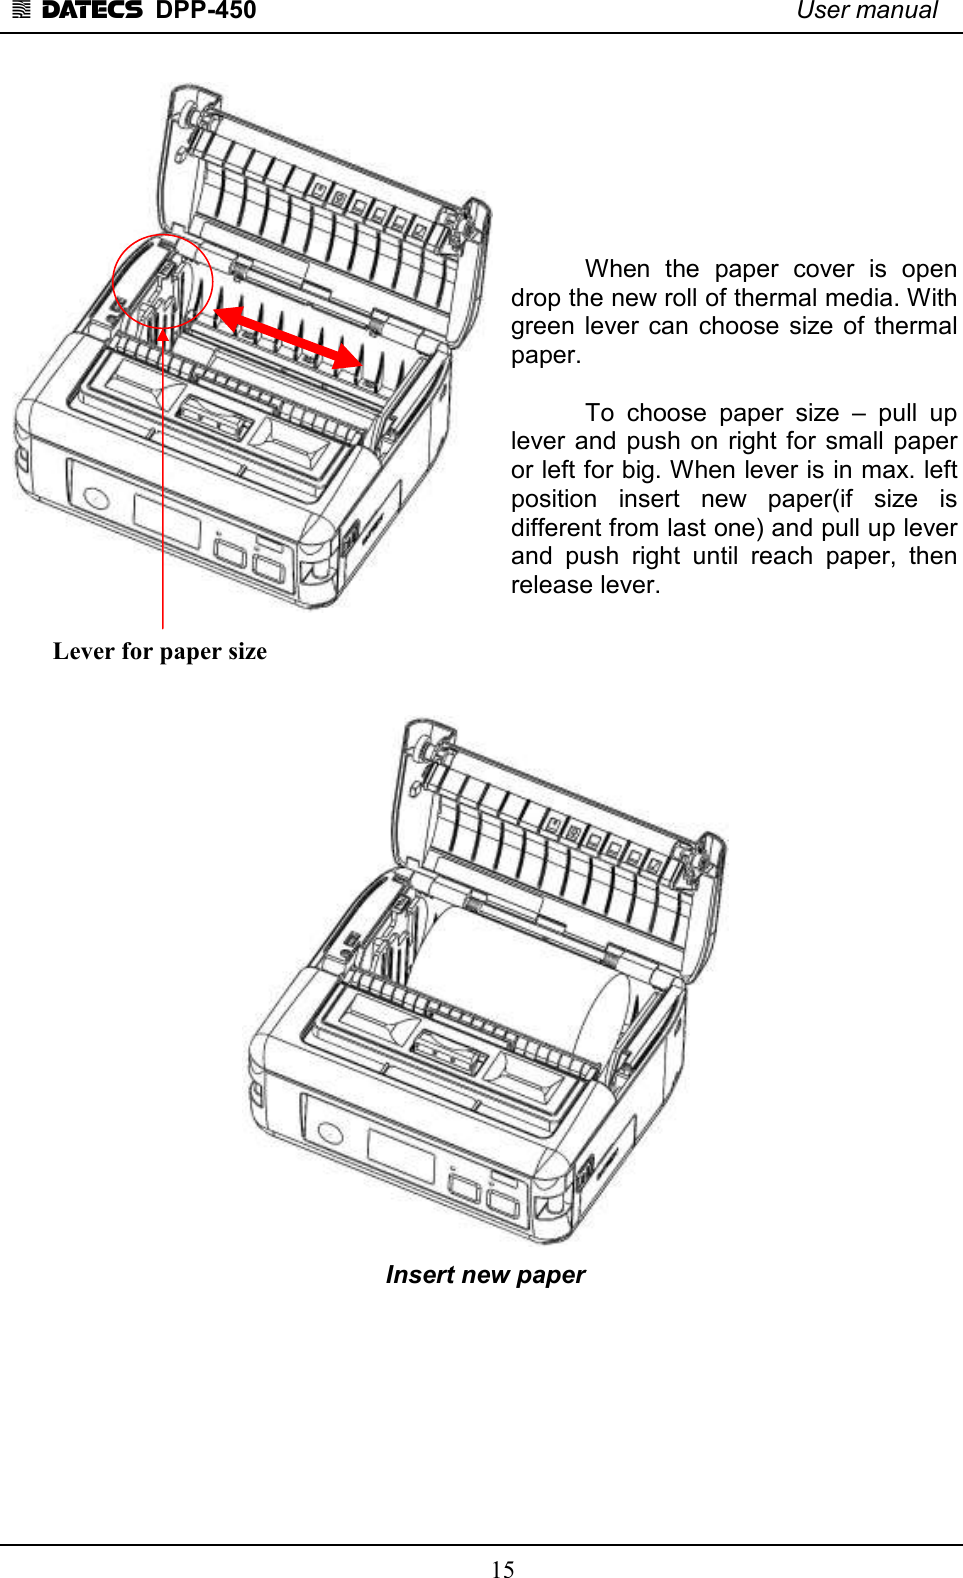 1 DATECS  DPP-450    User manual     15          When  the  paper  cover  is  open drop the new roll of thermal media. With green lever can  choose  size  of  thermal paper.     To  choose  paper  size  –  pull  up lever and  push on  right for  small  paper or left for big. When lever is in max. left position  insert  new  paper(if  size  is different from last one) and pull up lever and  push  right  until  reach  paper,  then release lever.                        Insert new paper         Lever for paper size  